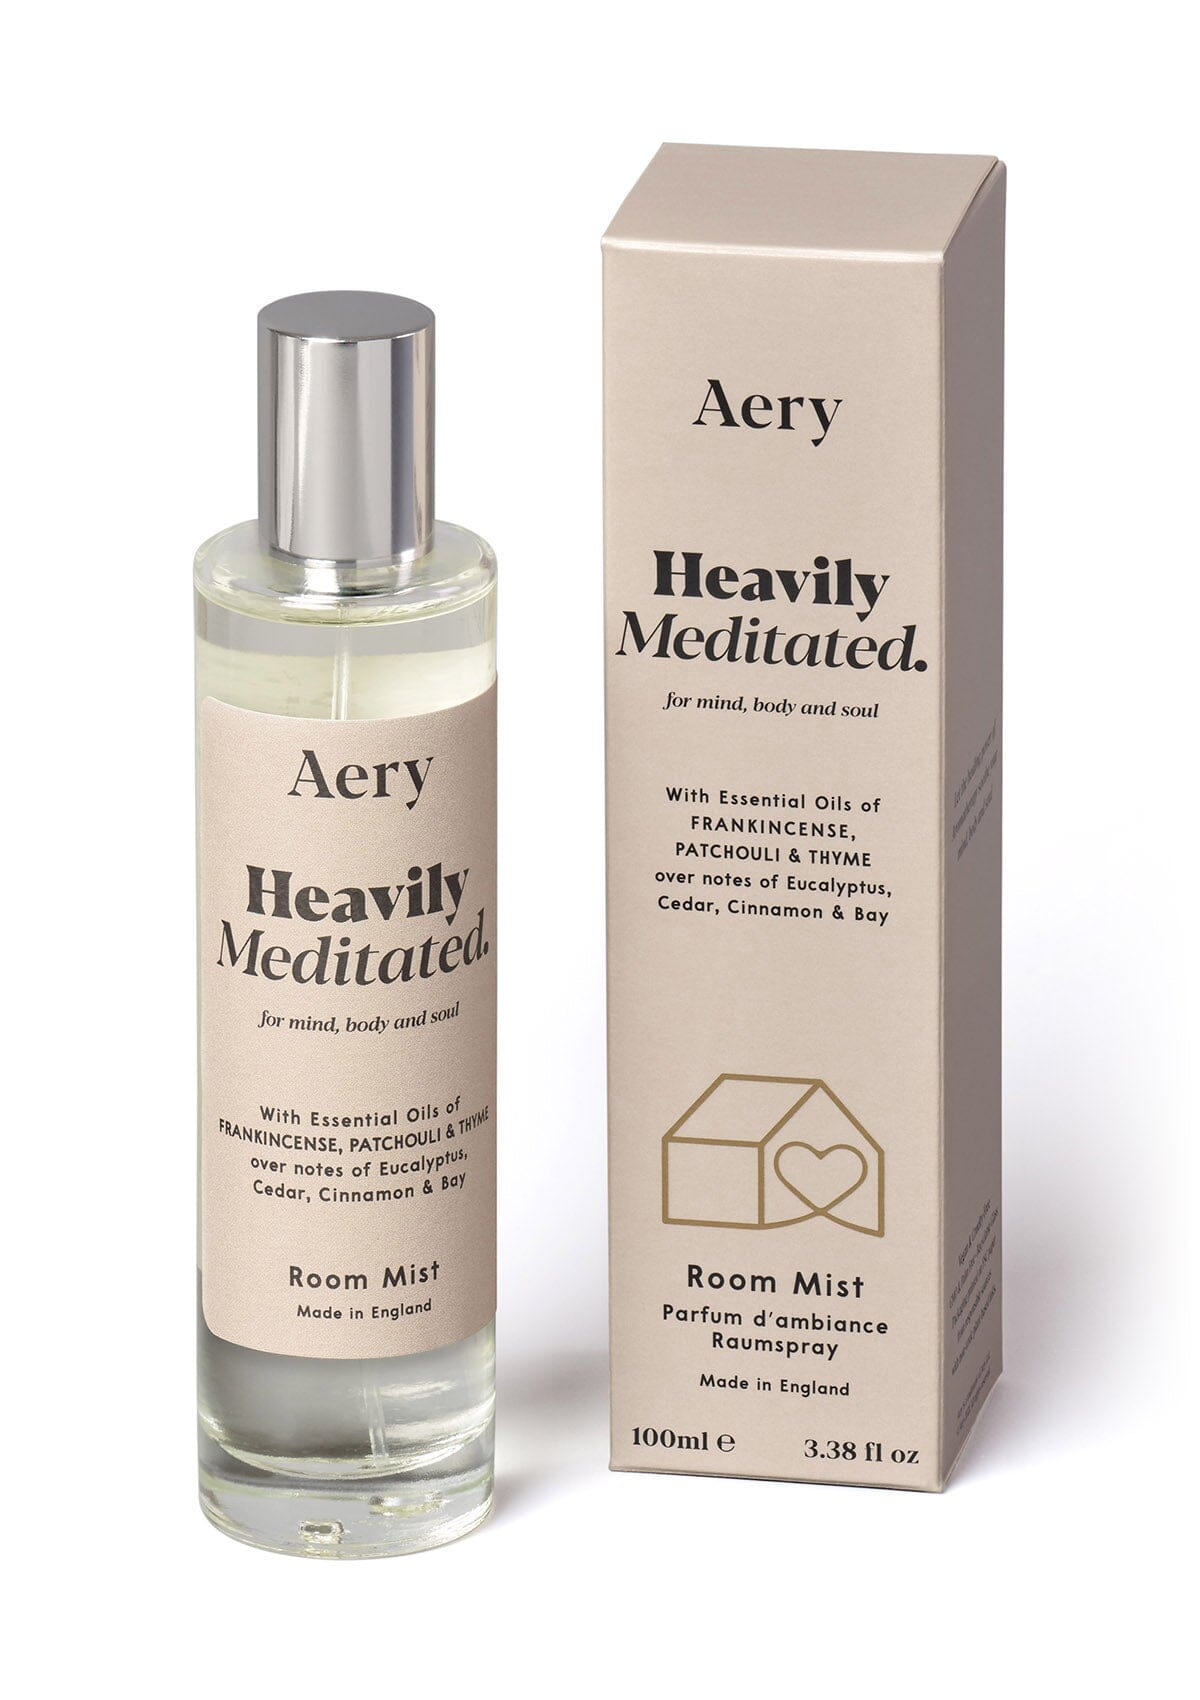 Heavily meditated room mist displayed next to product packaging by Aery on white background 